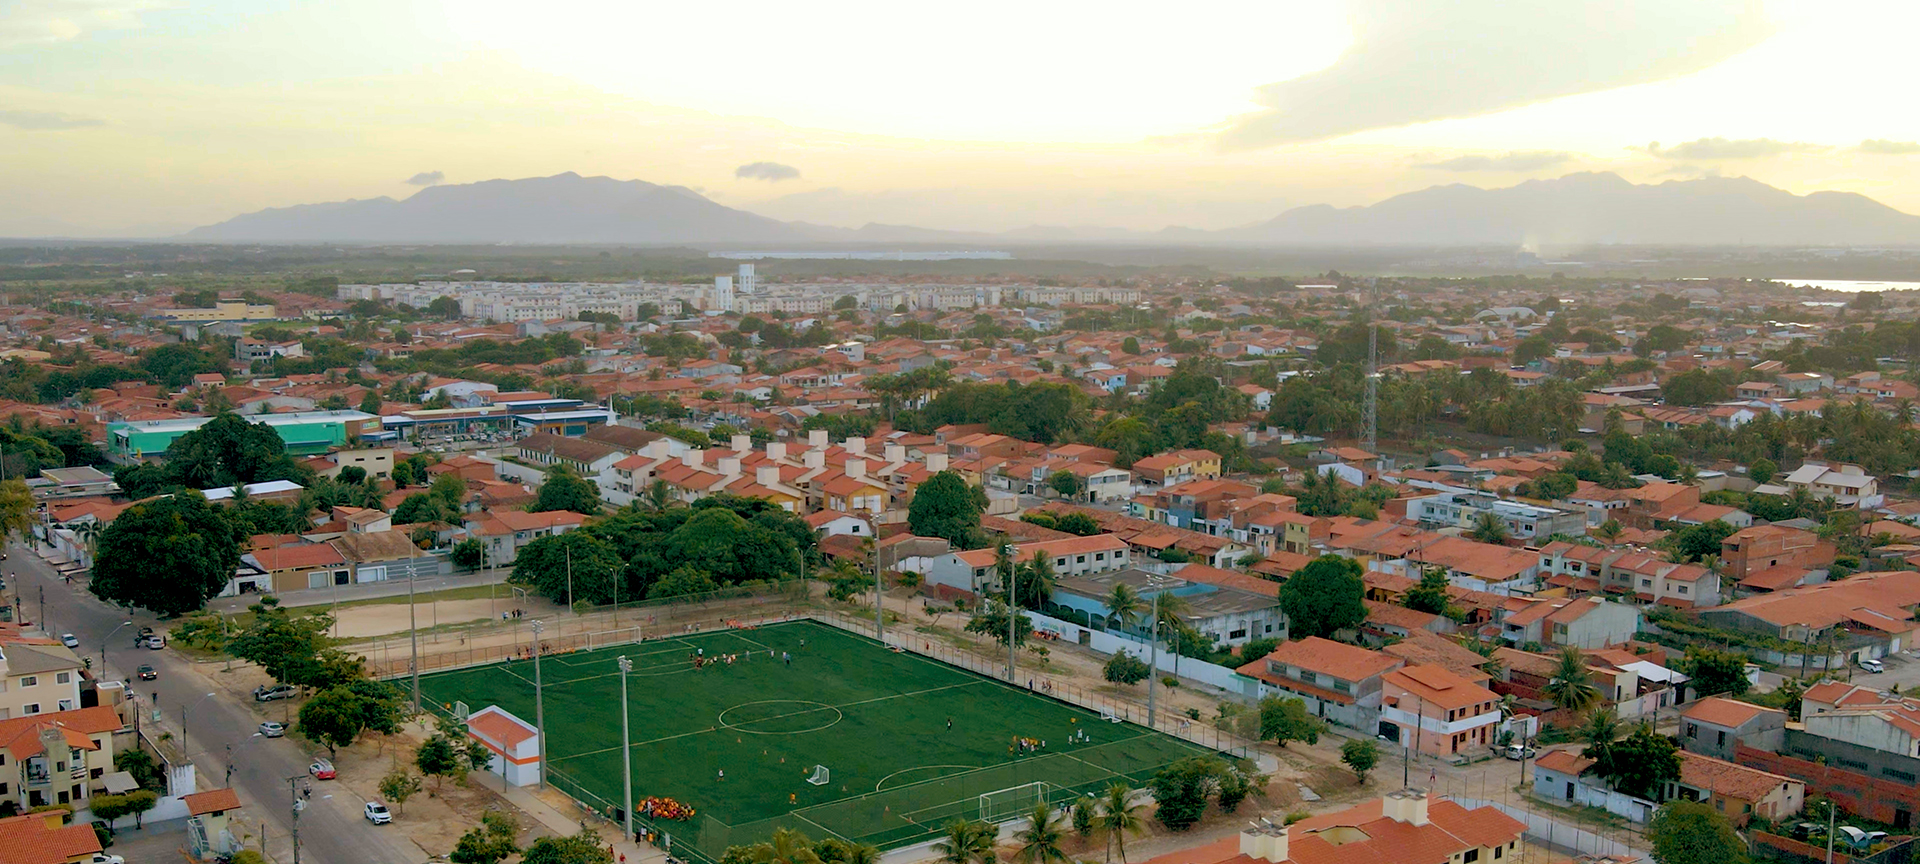 A birds-eye view of the sun rising over a town. Homes with orange roofs fill the town and a green football field can be seen. 